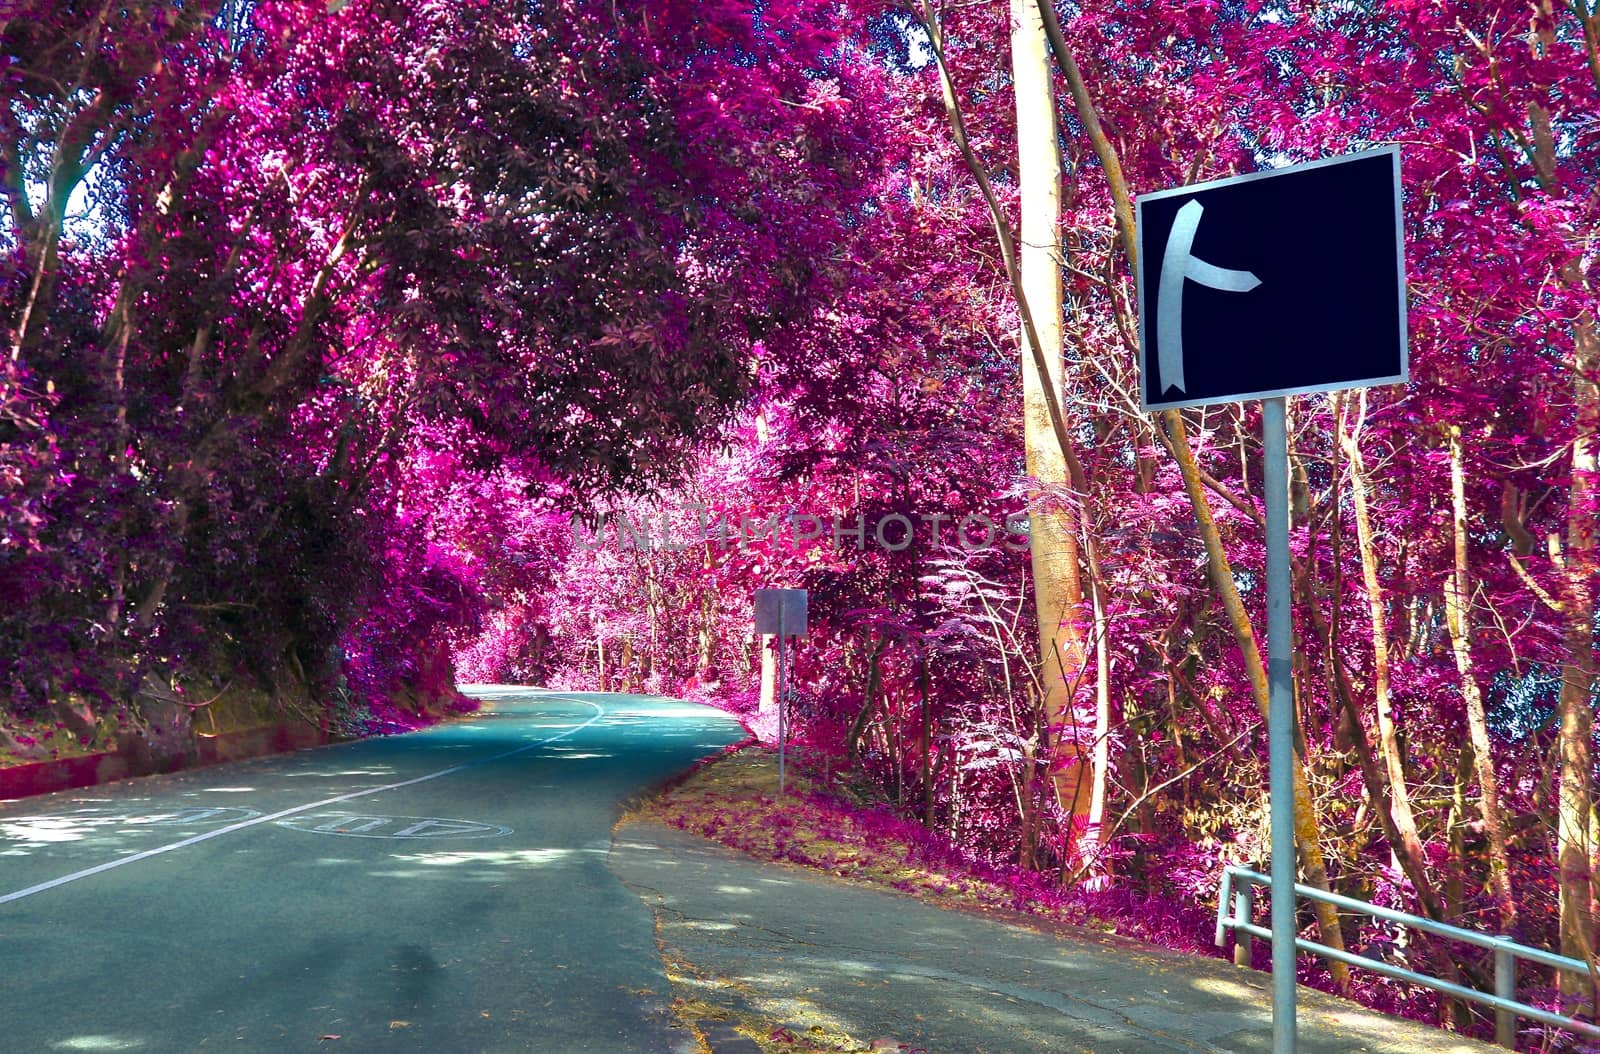 Beautiful pink and purple infrared shots of tropical palm trees  by MP_foto71